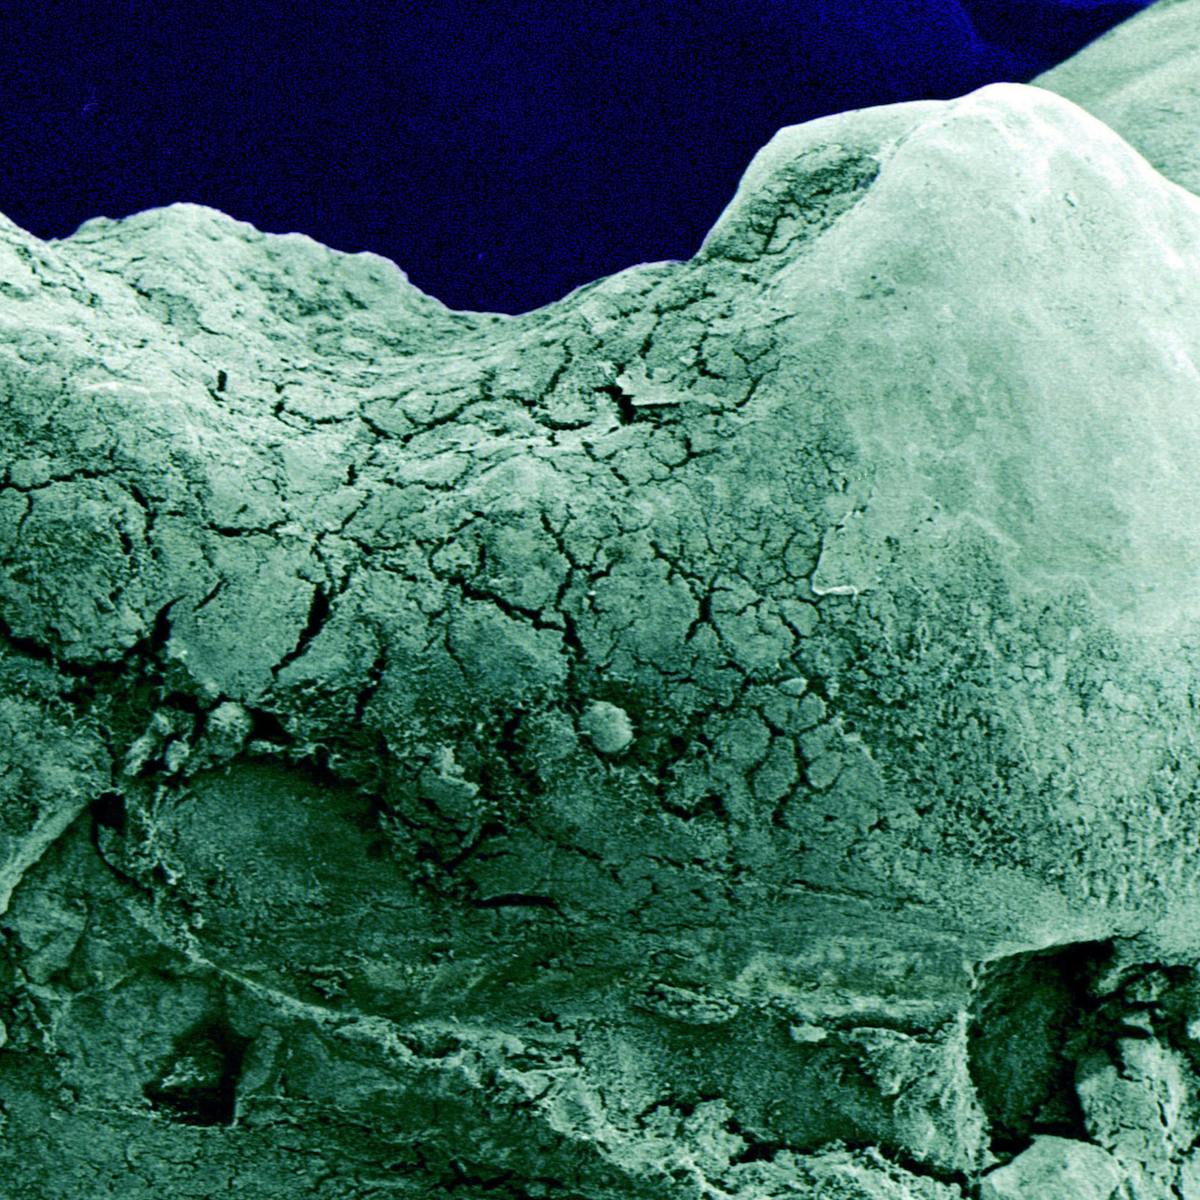 Colour photograph of a tooth, taken using a scanning electron microscope, showing the rough texture of the surface of the tooth.